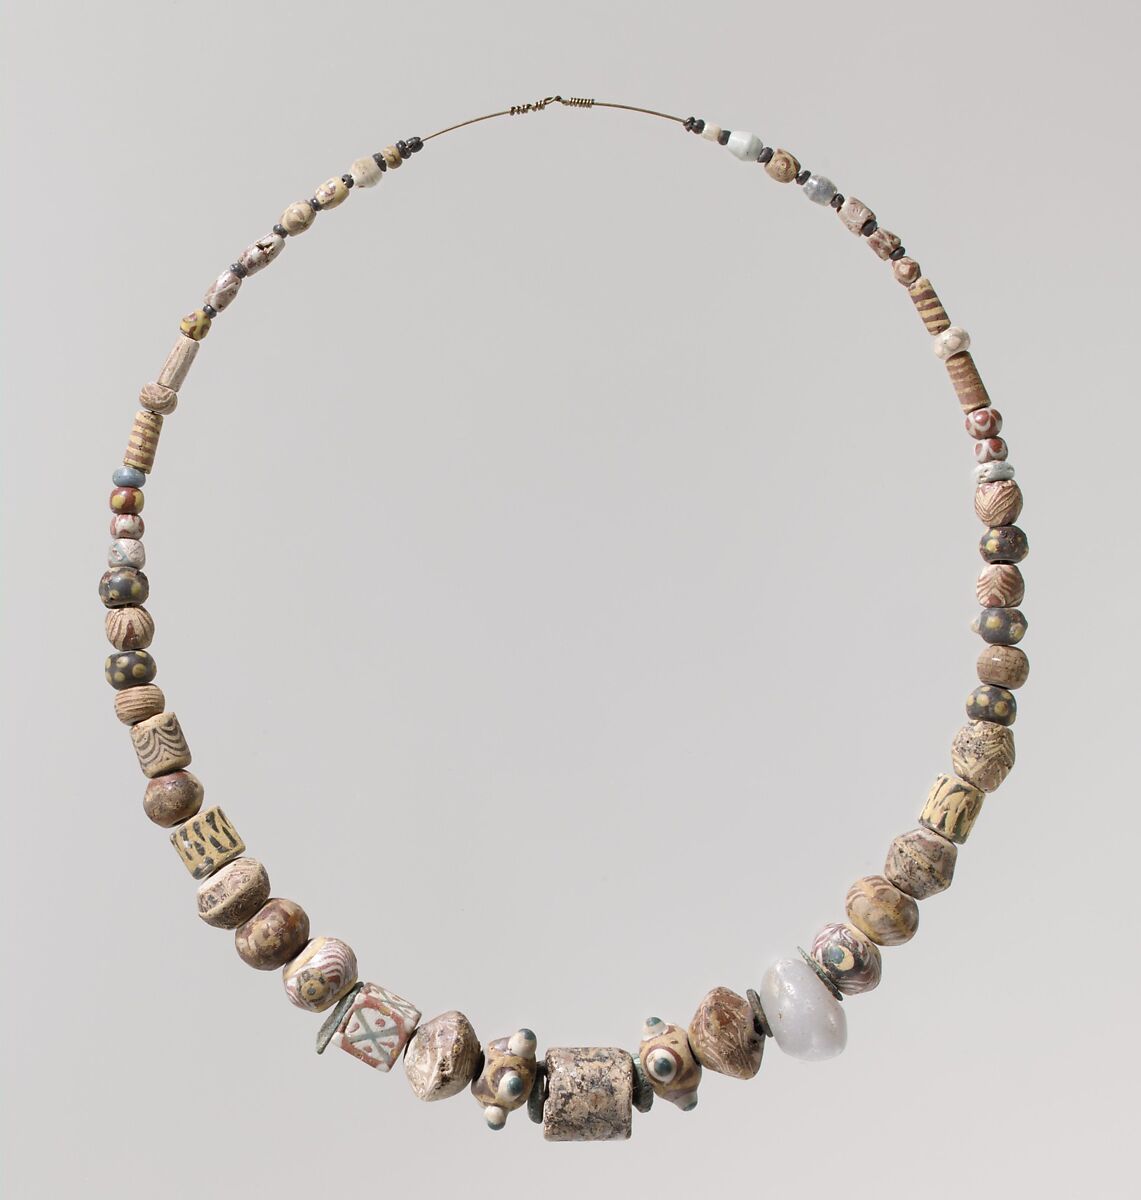 Beads from a Necklace, Glass, copper alloy rings, Frankish 